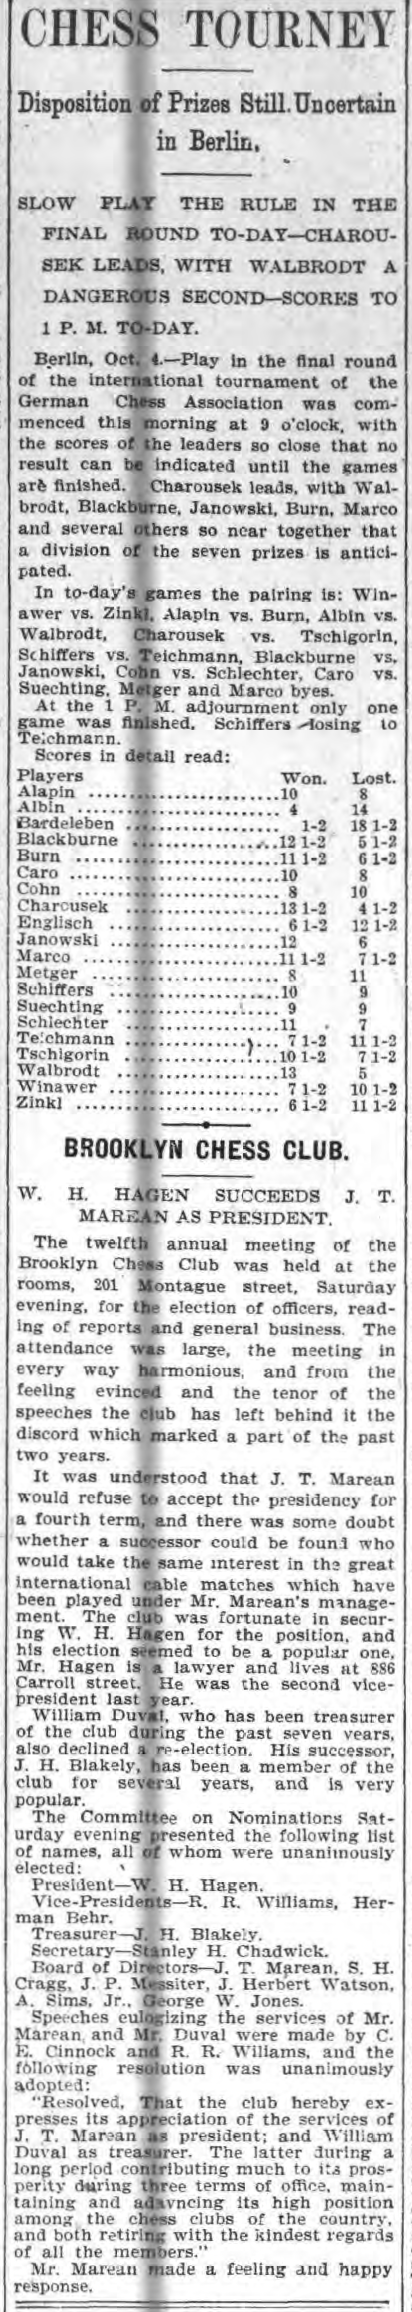 1897.10.04-01 Brooklyn Daily Standard-Union.png